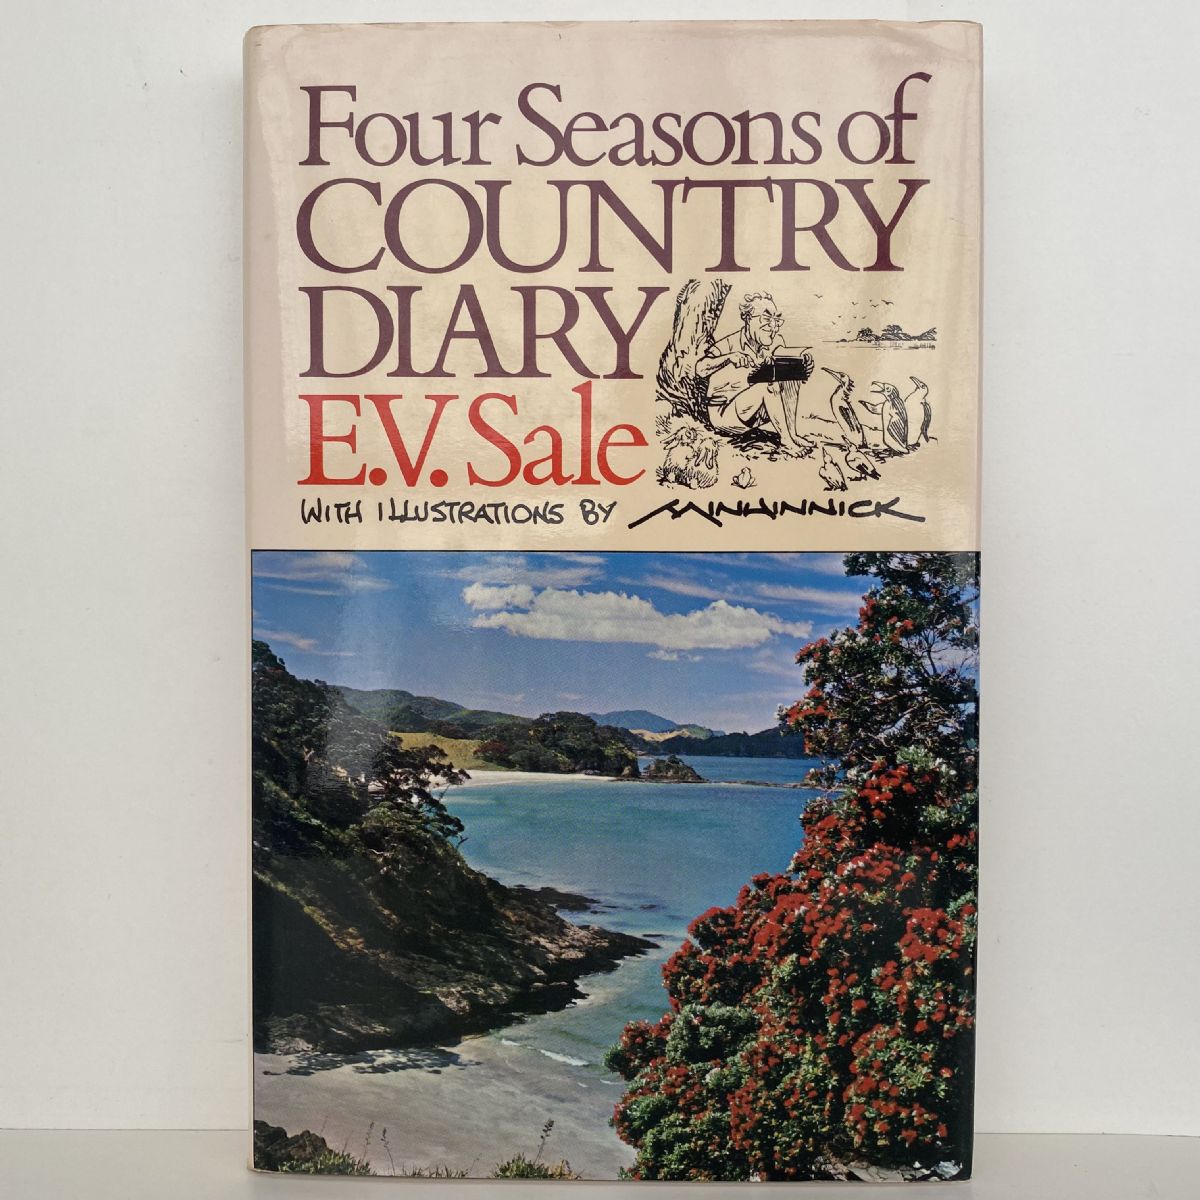 Four Seasons of COUNTRY DIARY